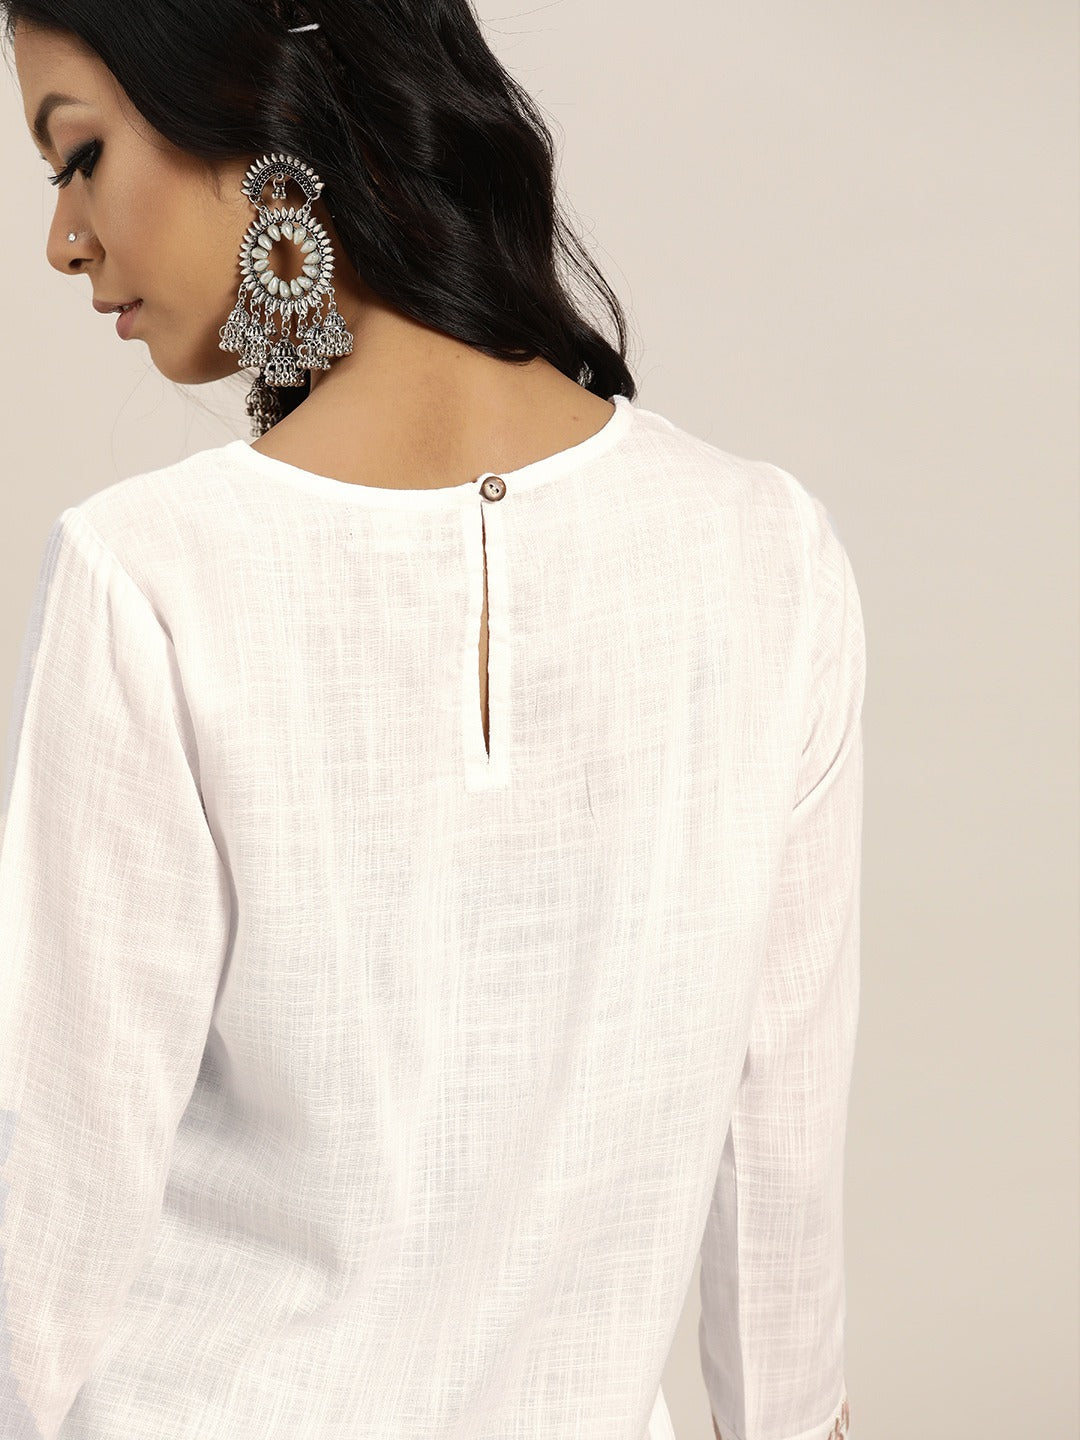 White Round Neck Embroidery Top